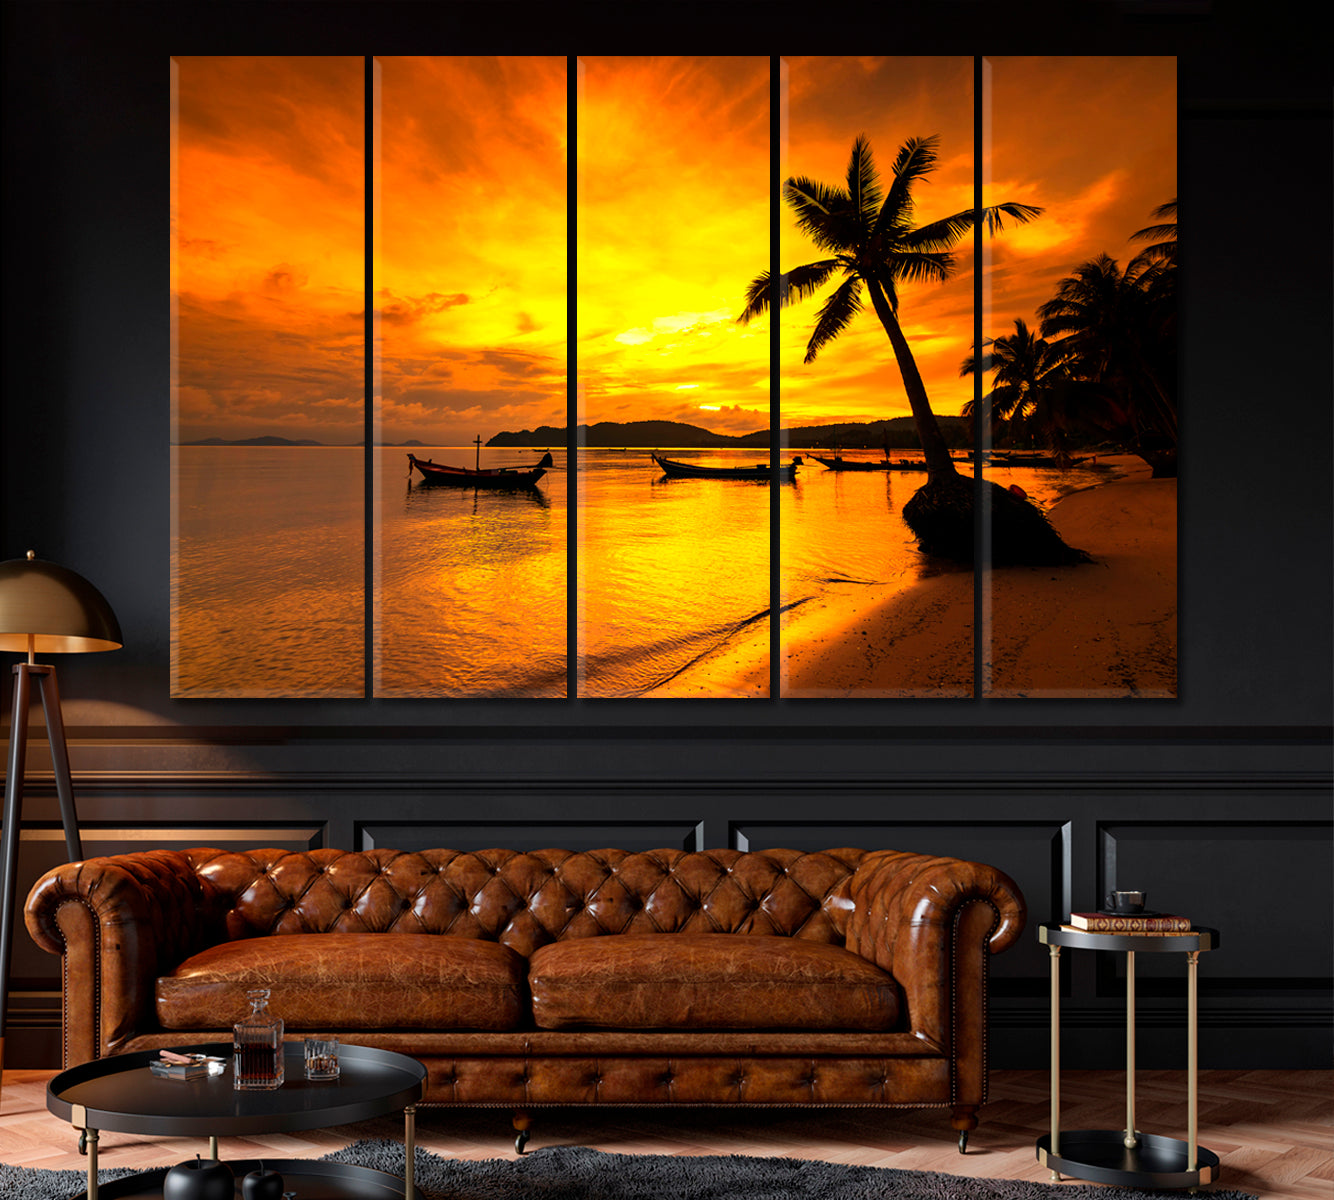 Sunset over Tropical Beach Thailand Canvas Print ArtLexy 5 Panels 36"x24" inches 